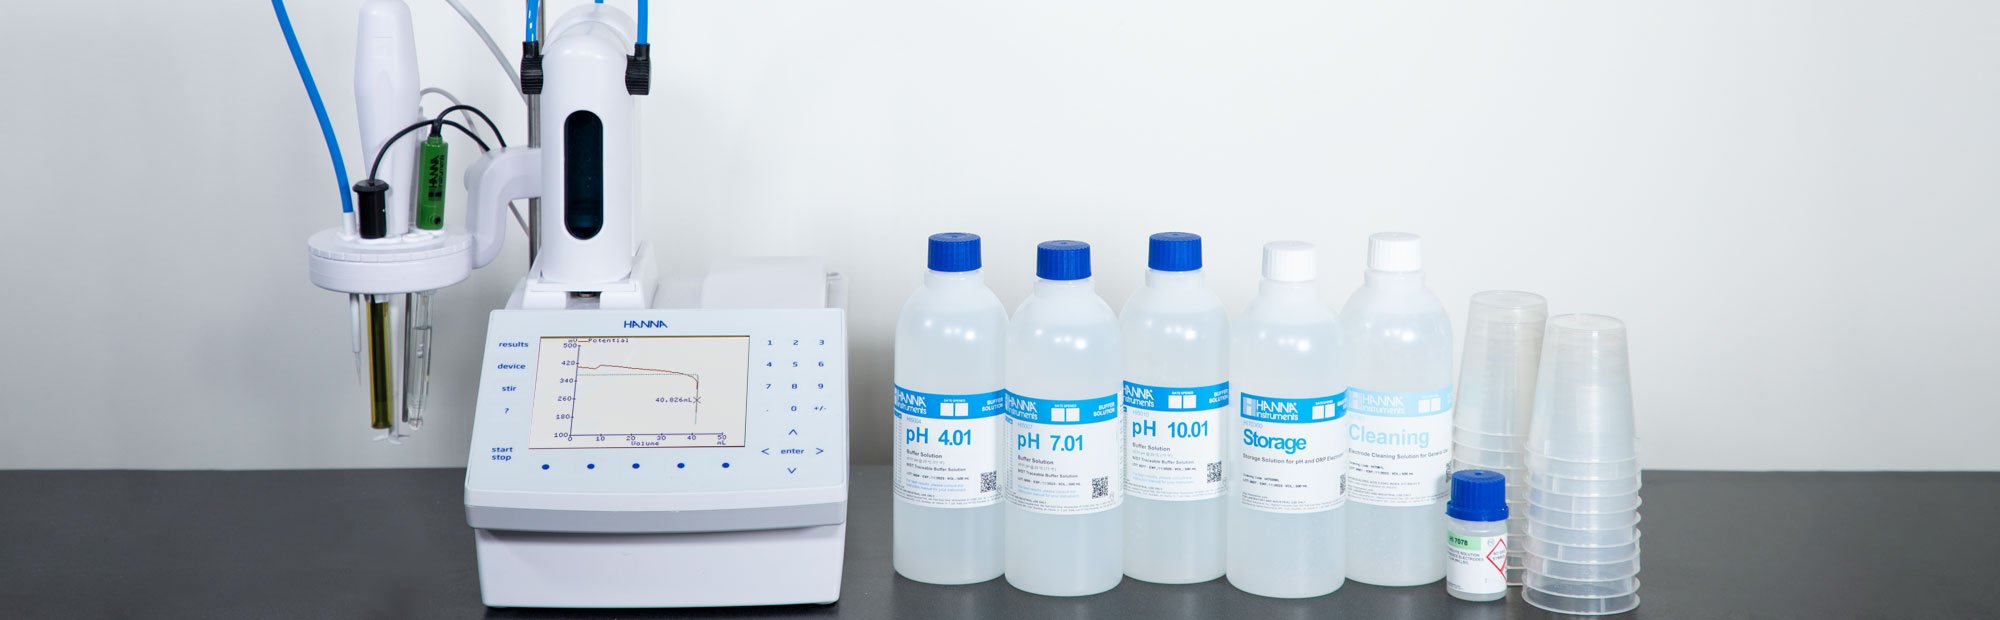 A complete kit to test Surfactant and Quats